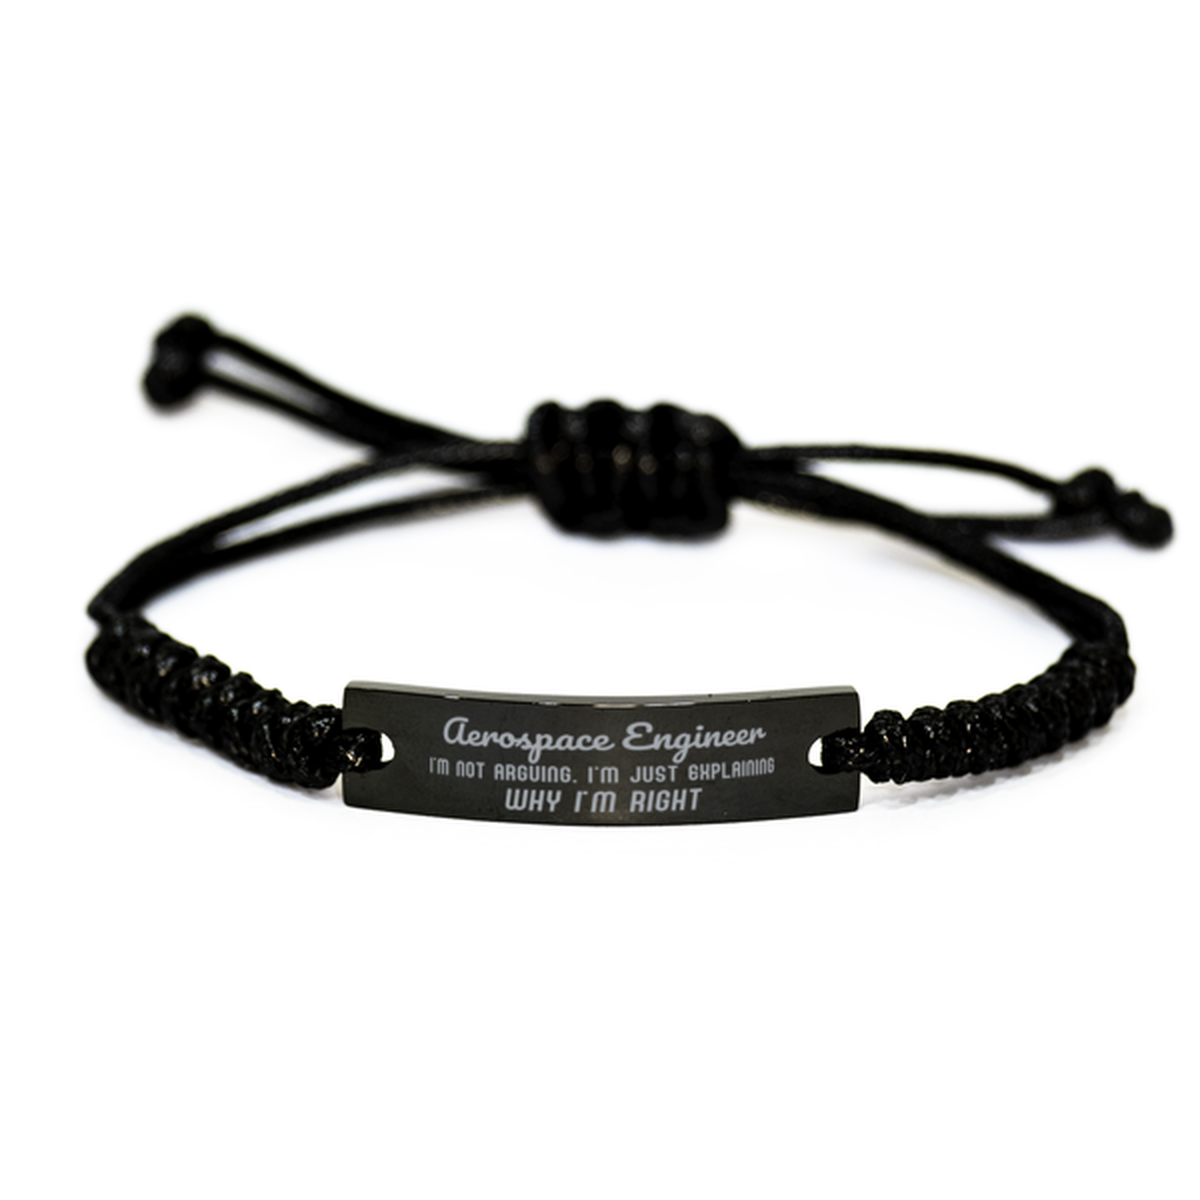 Aerospace Engineer I'm not Arguing. I'm Just Explaining Why I'm RIGHT Black Rope Bracelet, Funny Saying Quote Aerospace Engineer Gifts For Aerospace Engineer Graduation Birthday Christmas Gifts for Men Women Coworker